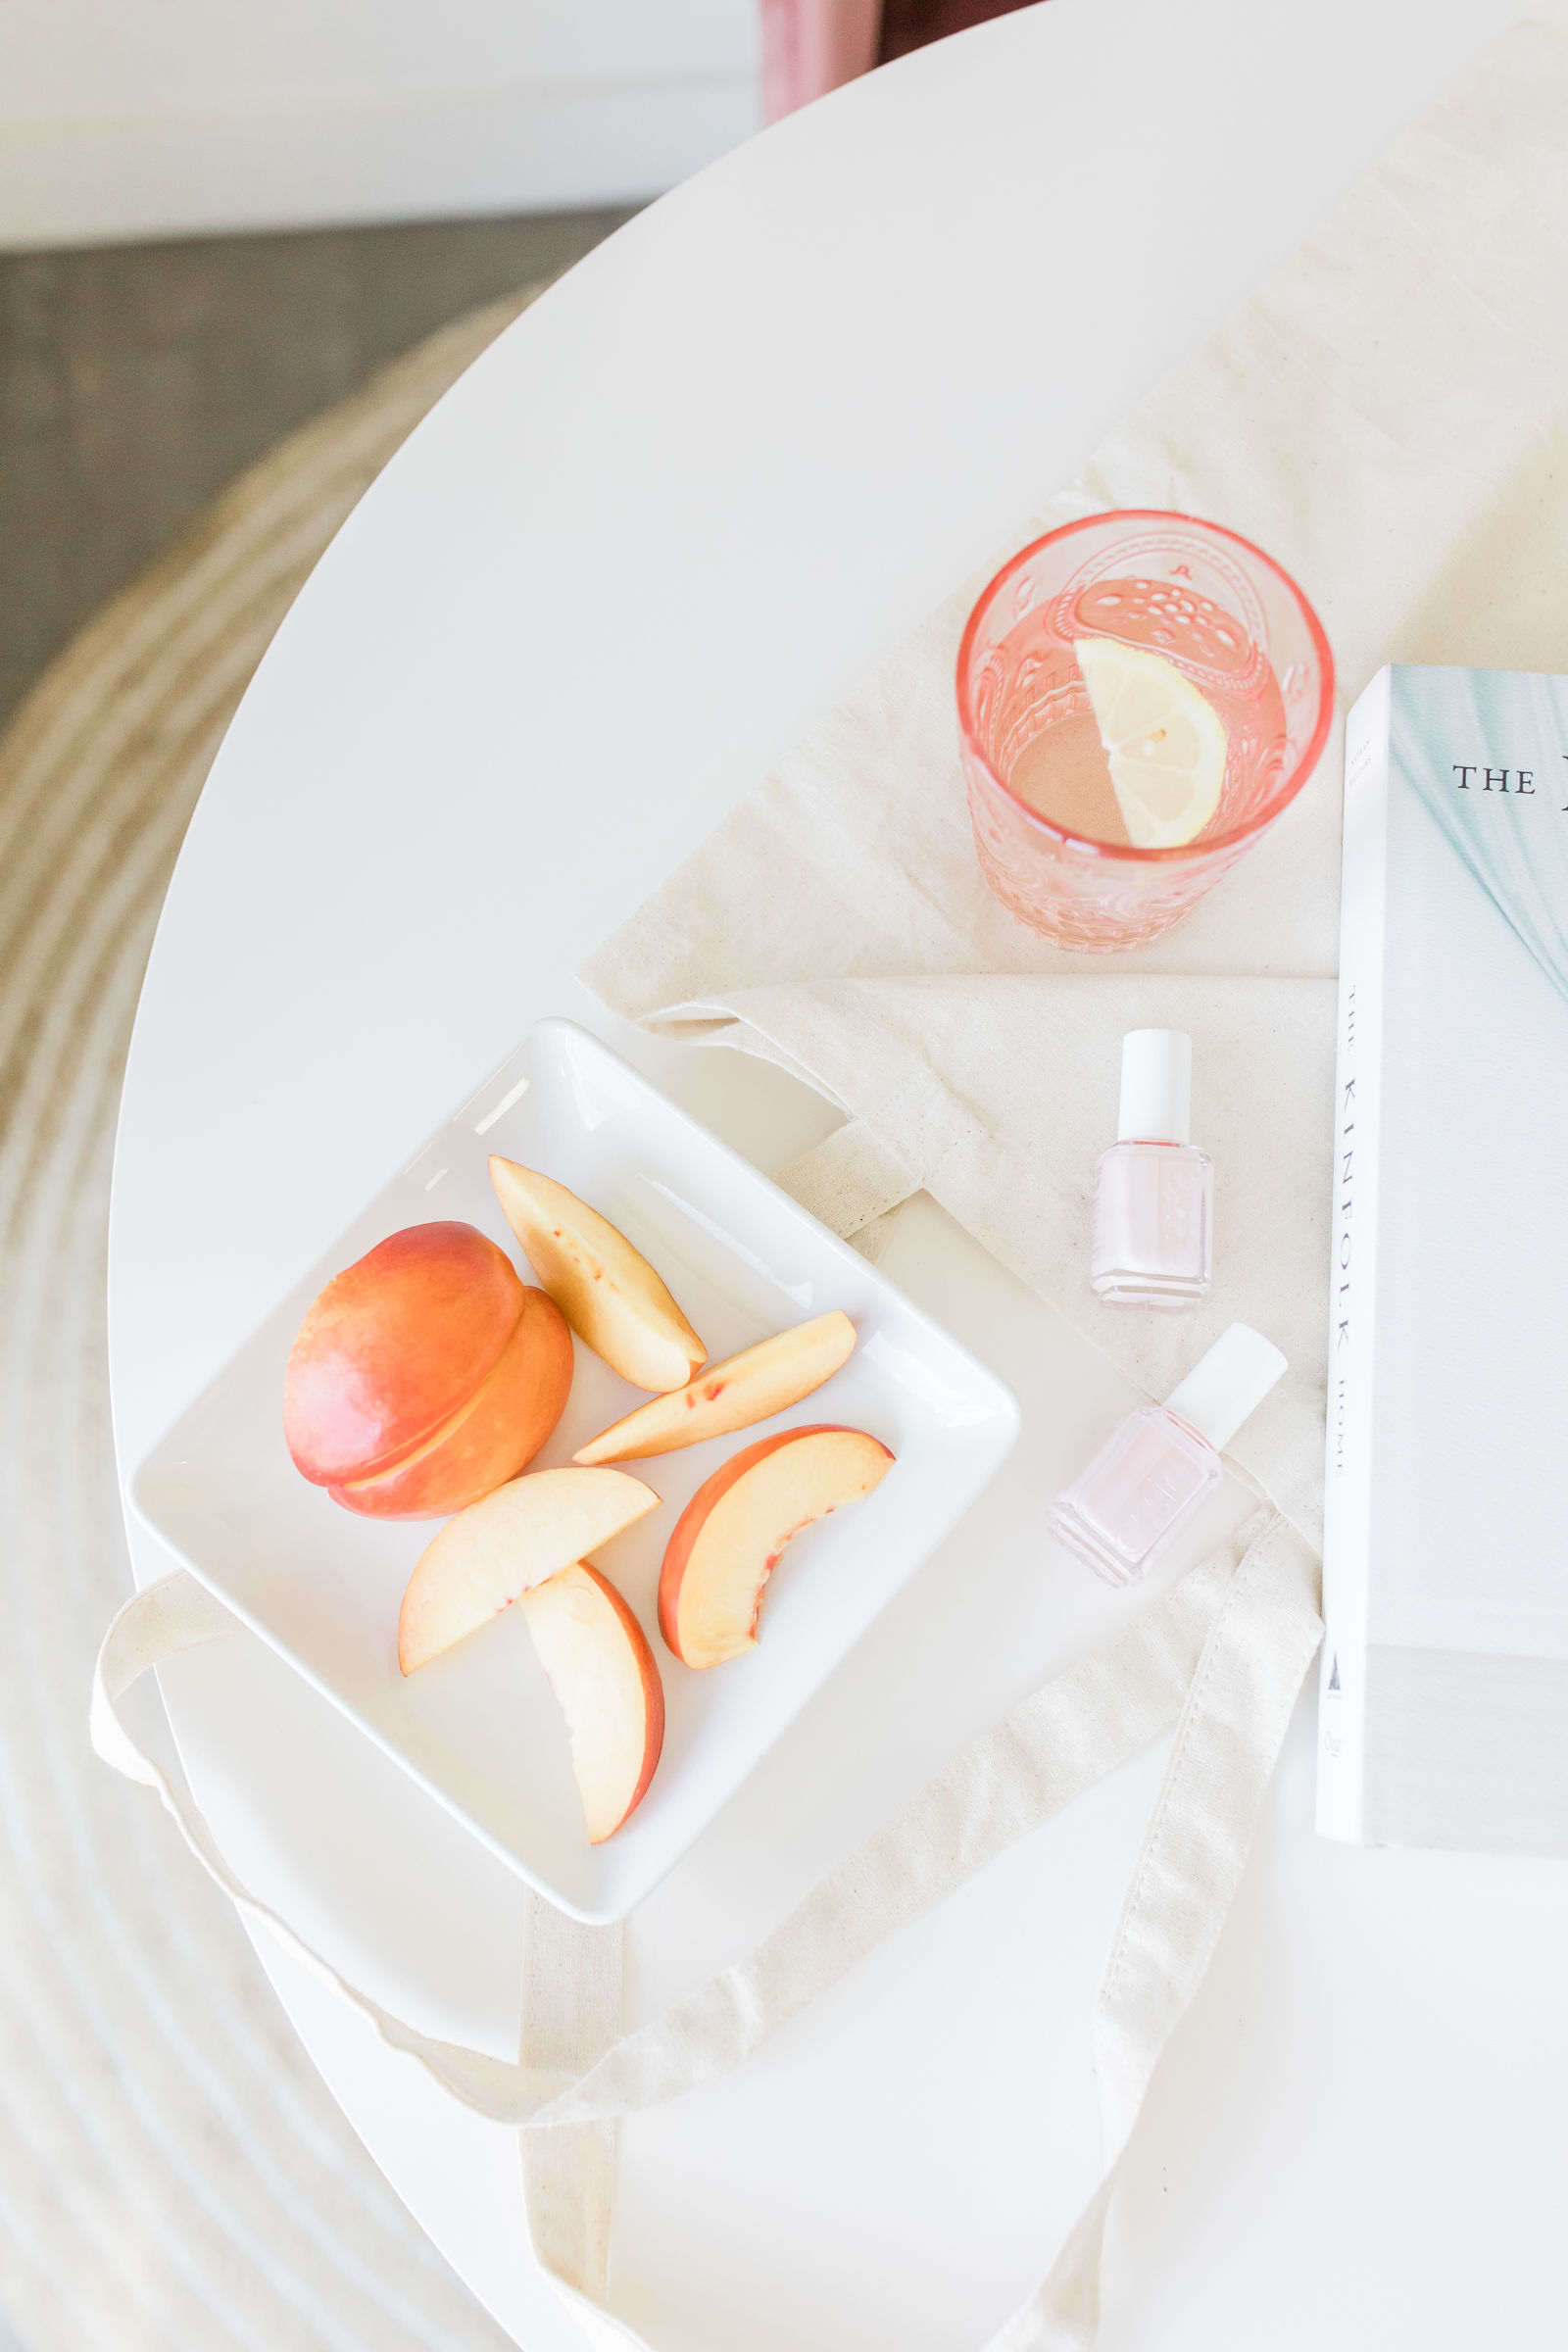 My favorite self love wellness ritual. because everyone needs a little self care every now and then. Check out my favorite products for self love too!